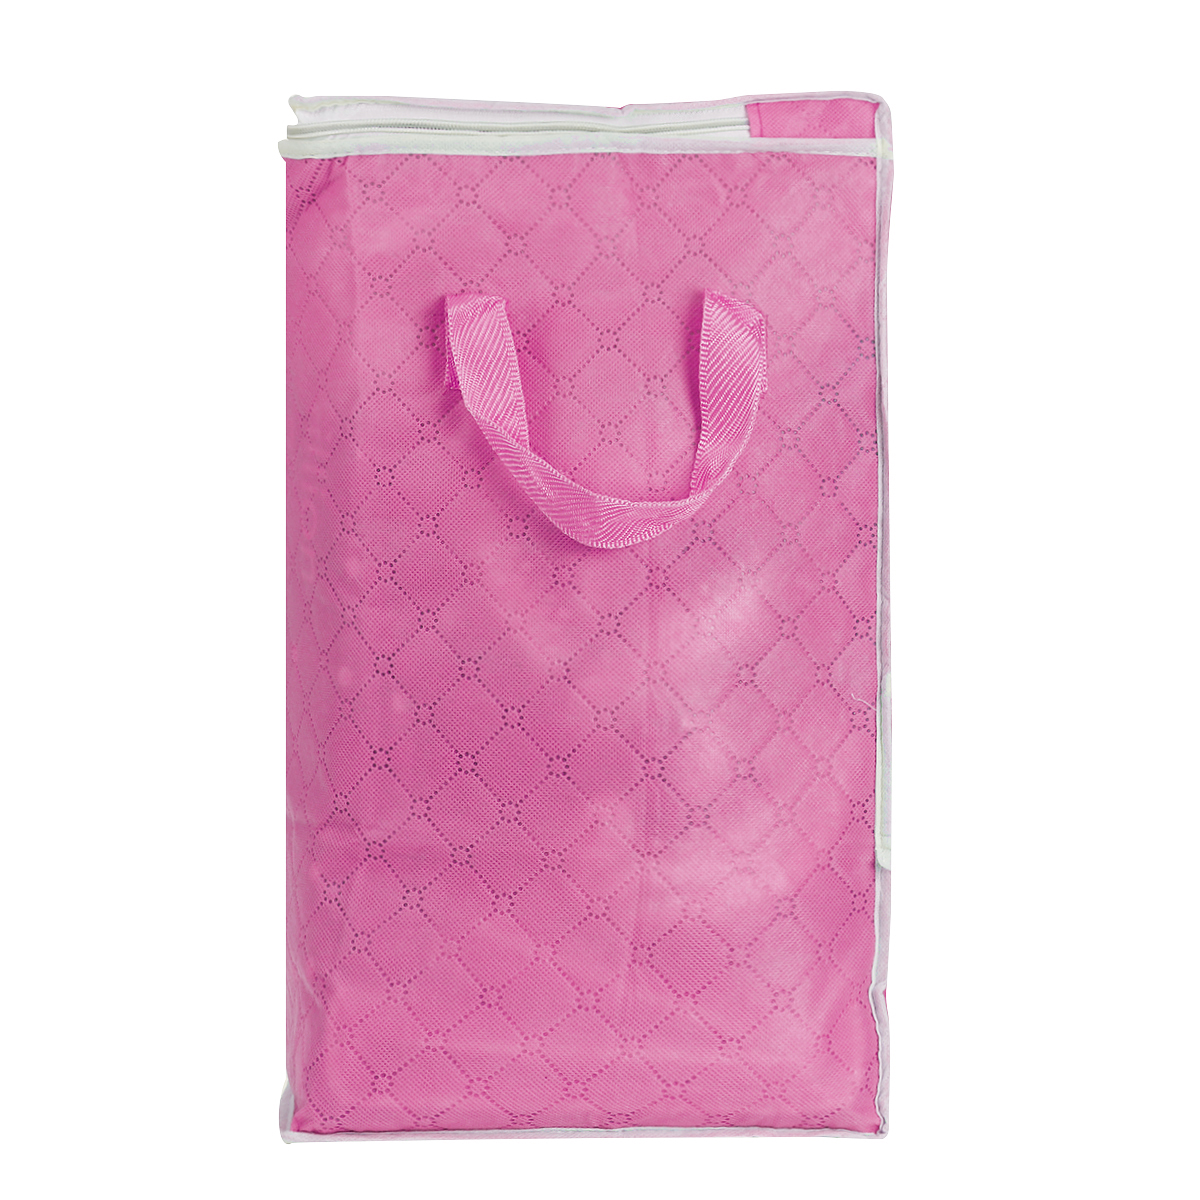 Anti-Dust-Large-Storage-Bag-Clothes-Quilts-Blanket-Sort-Suitcase-for-Organizer-1644466-7